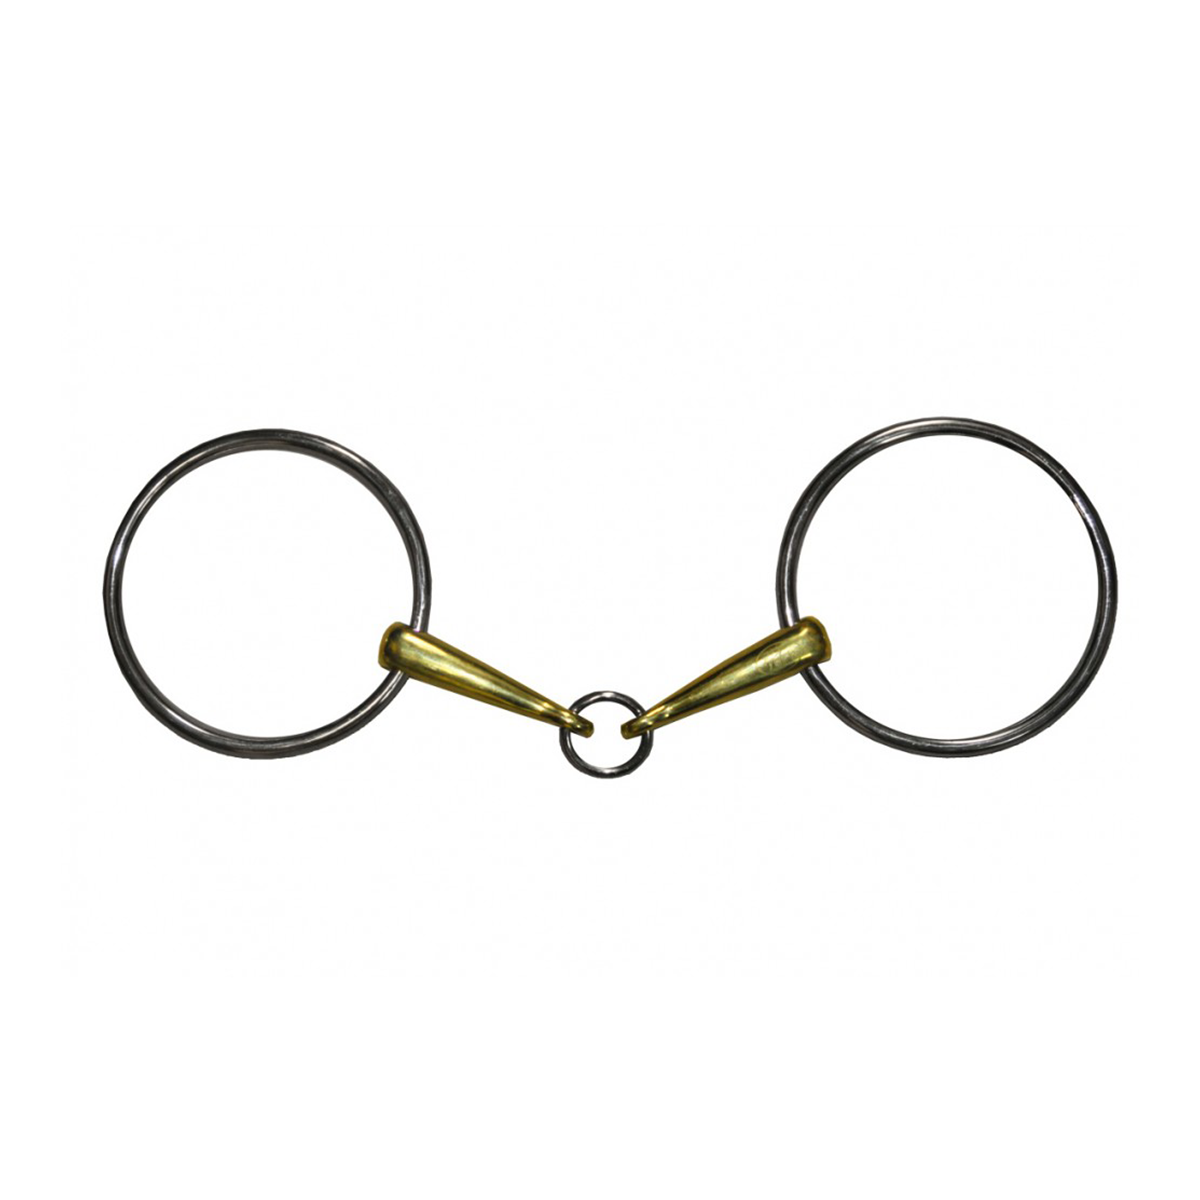 Jump'in Ring French Link Loose Ring Bit